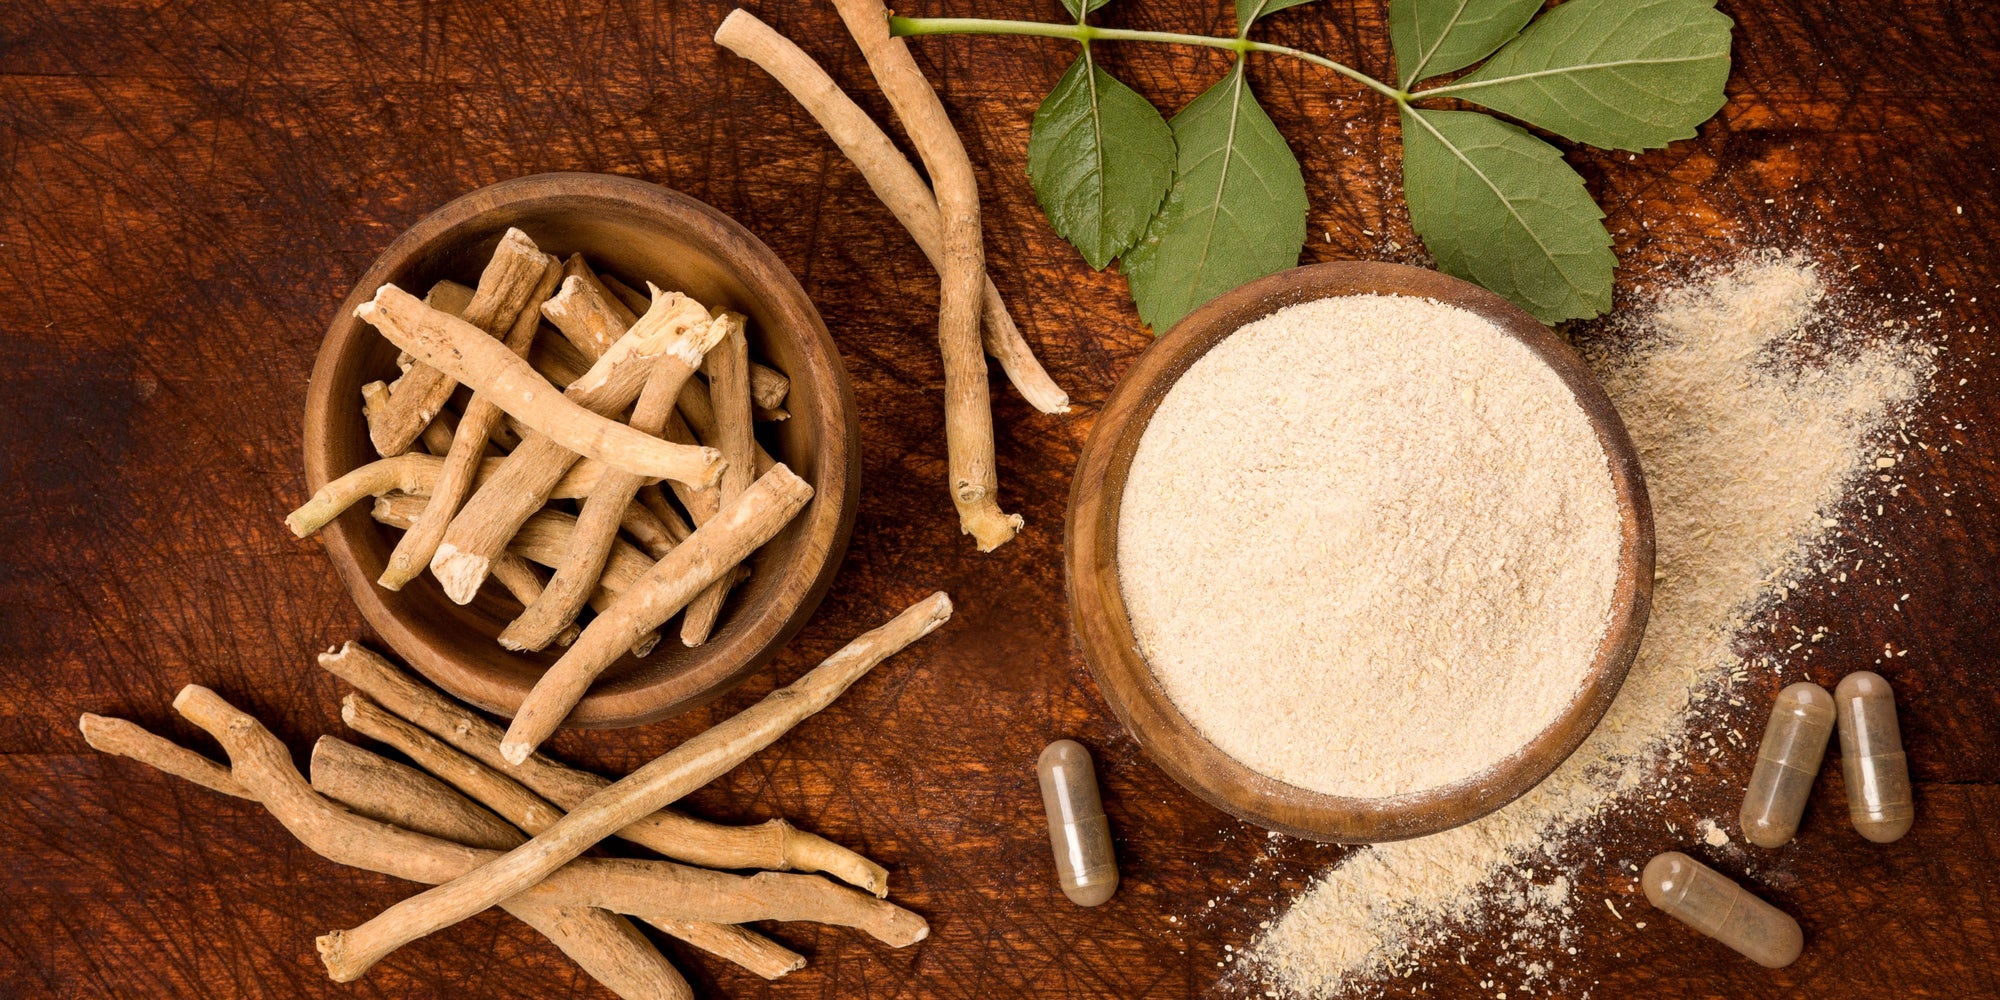 
                  wooden bowl of ashwagandha roots next to a wooden bowl of powder, capsules and leaves
                